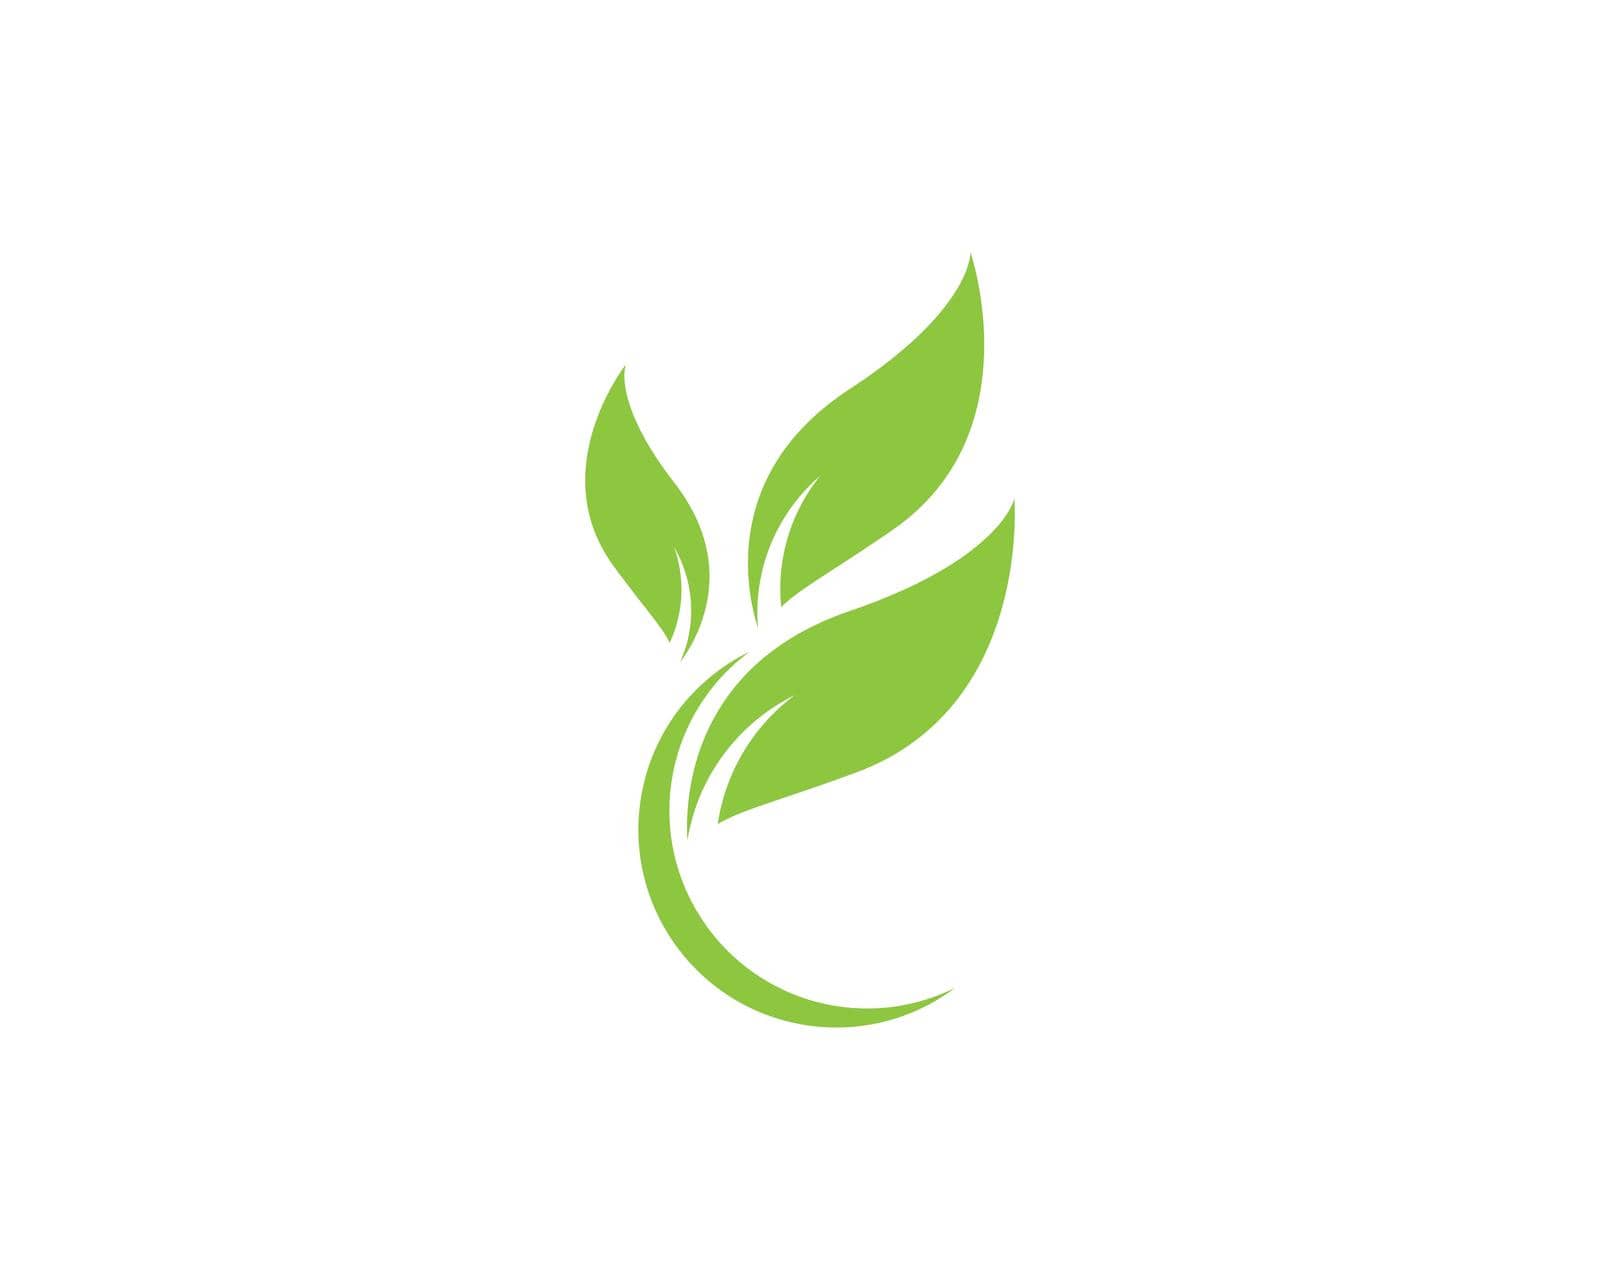 Logos of green leaf ecology nature element by awk